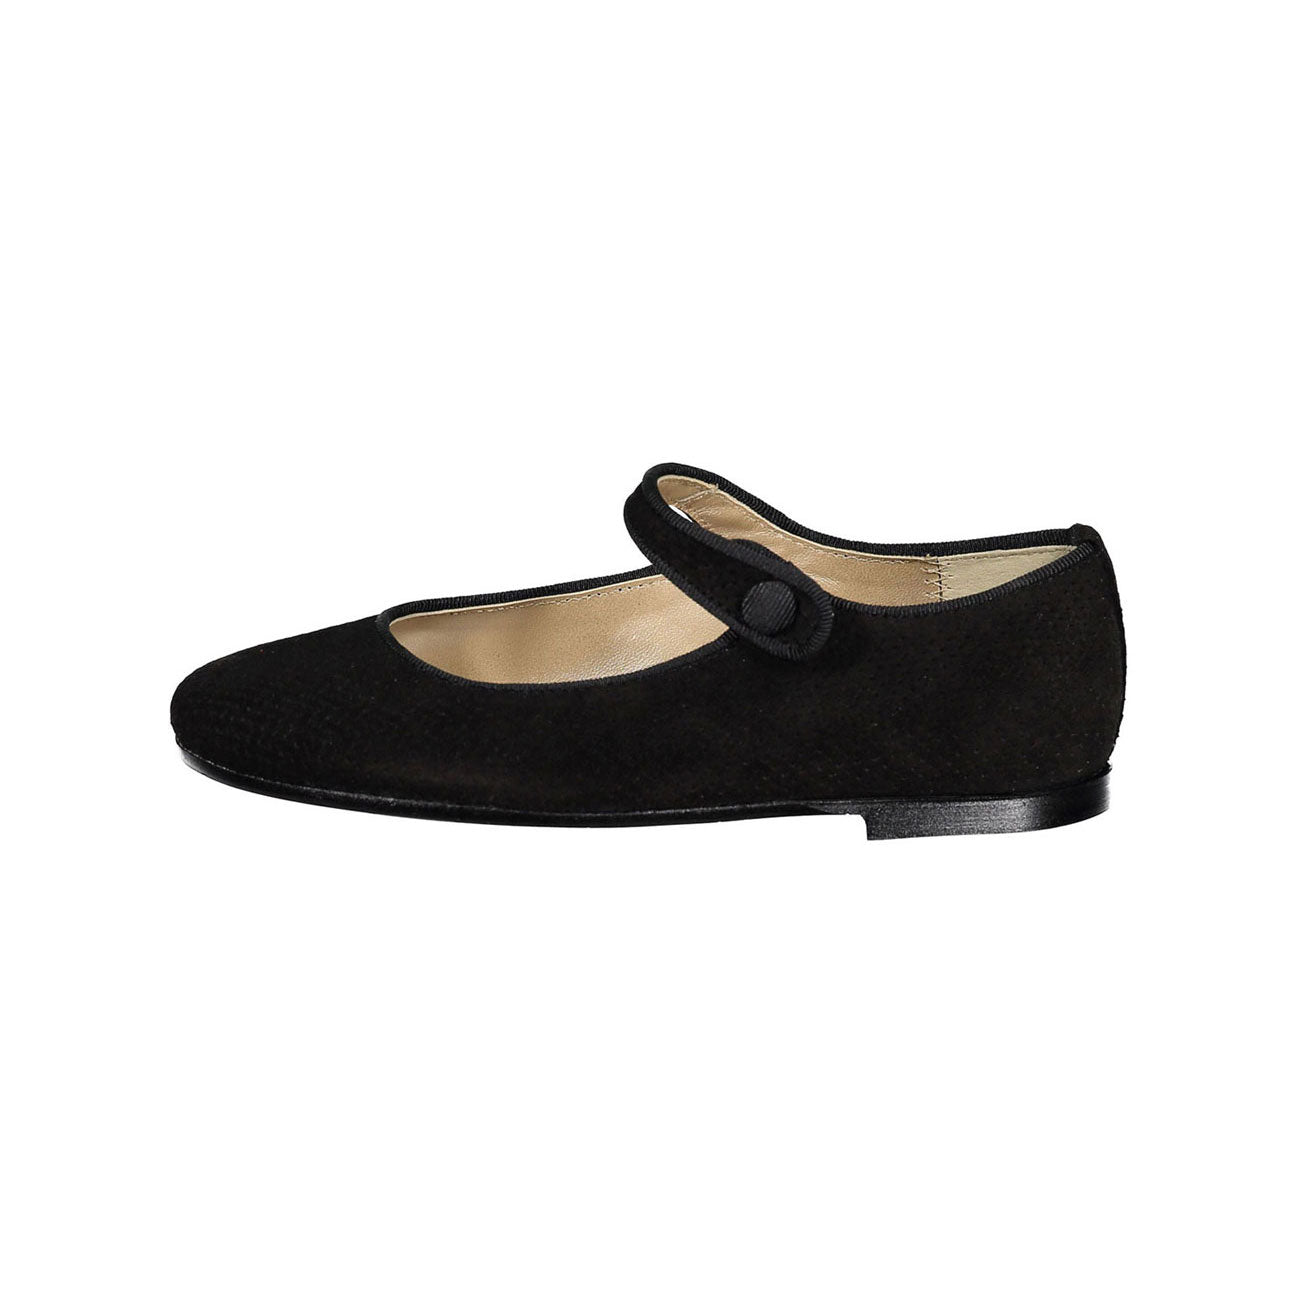 suede mary janes